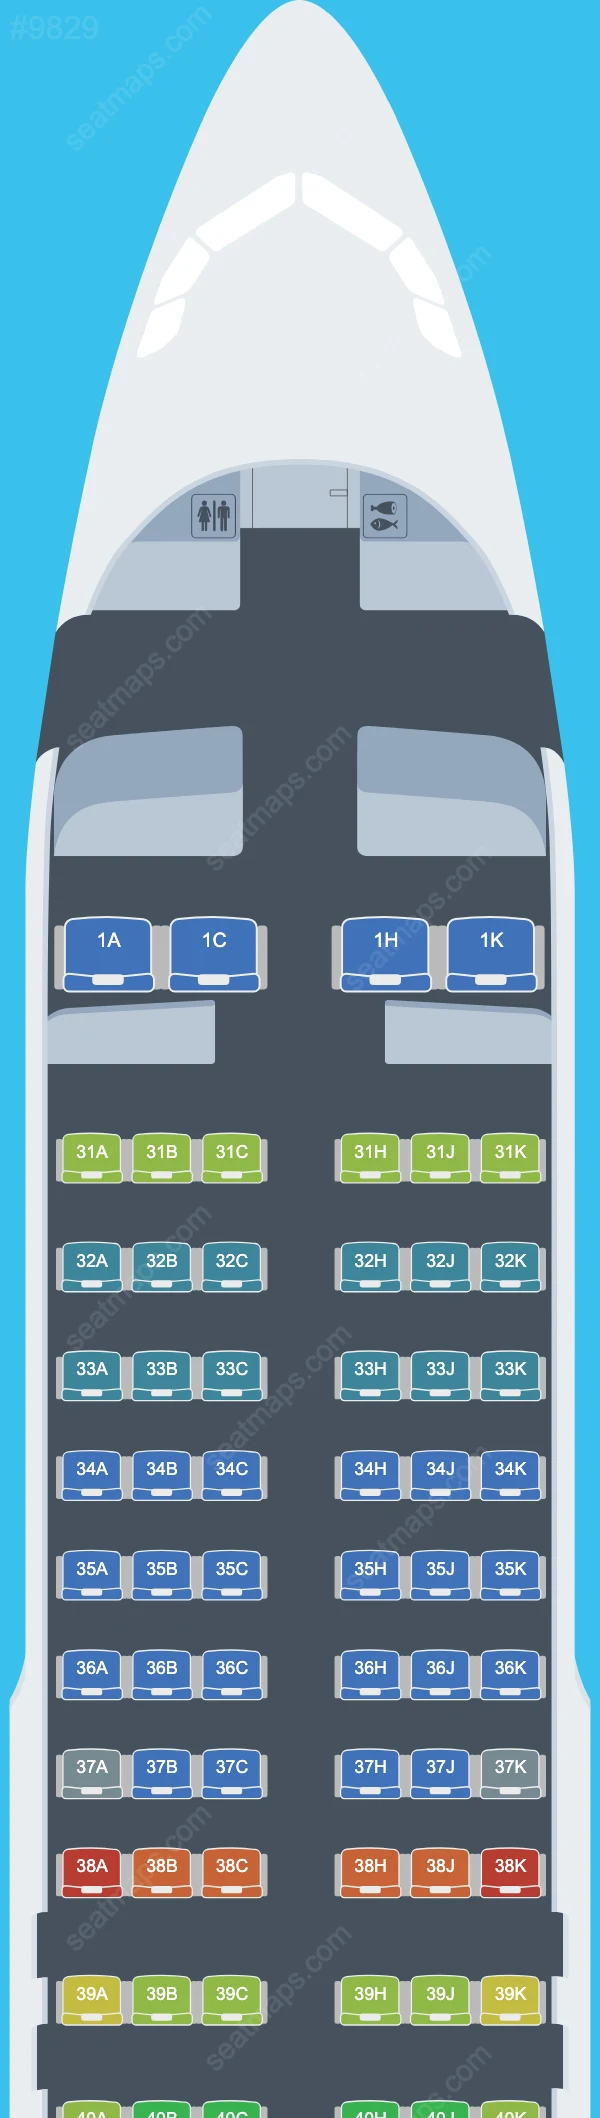 China Southern Airbus A320 Seat Maps A320-200 V.1